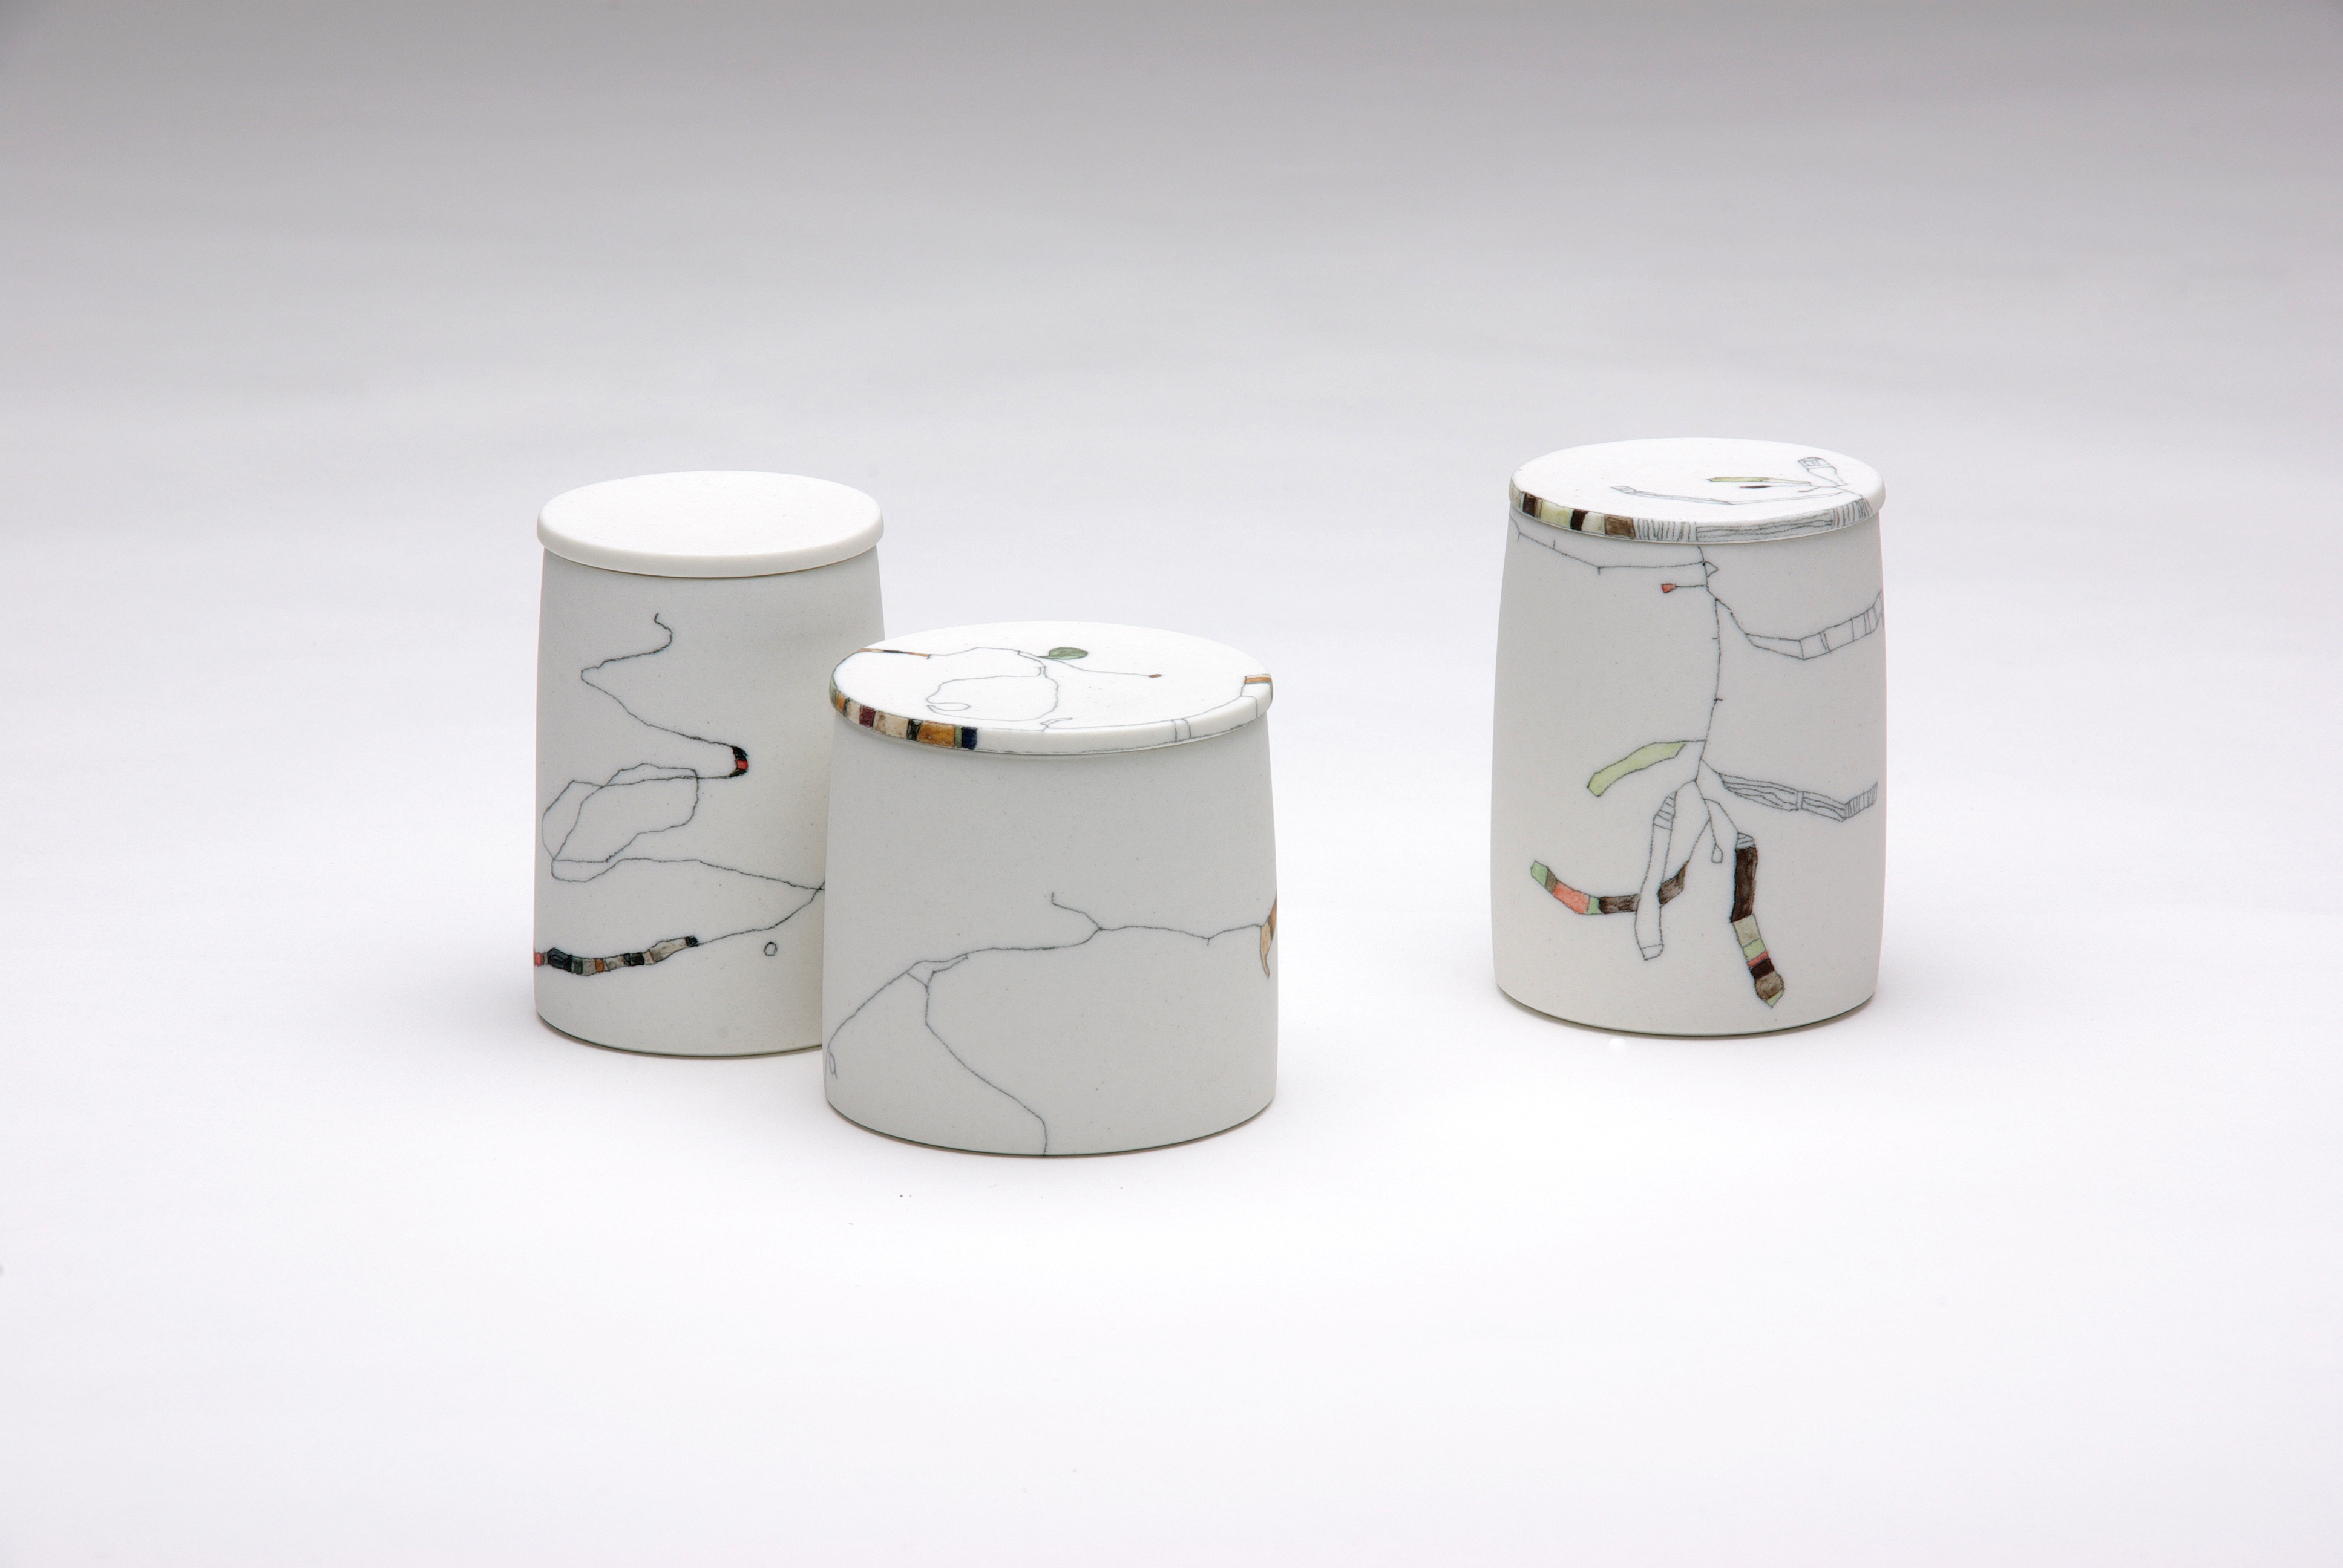 tania rollond three tea containers 2016